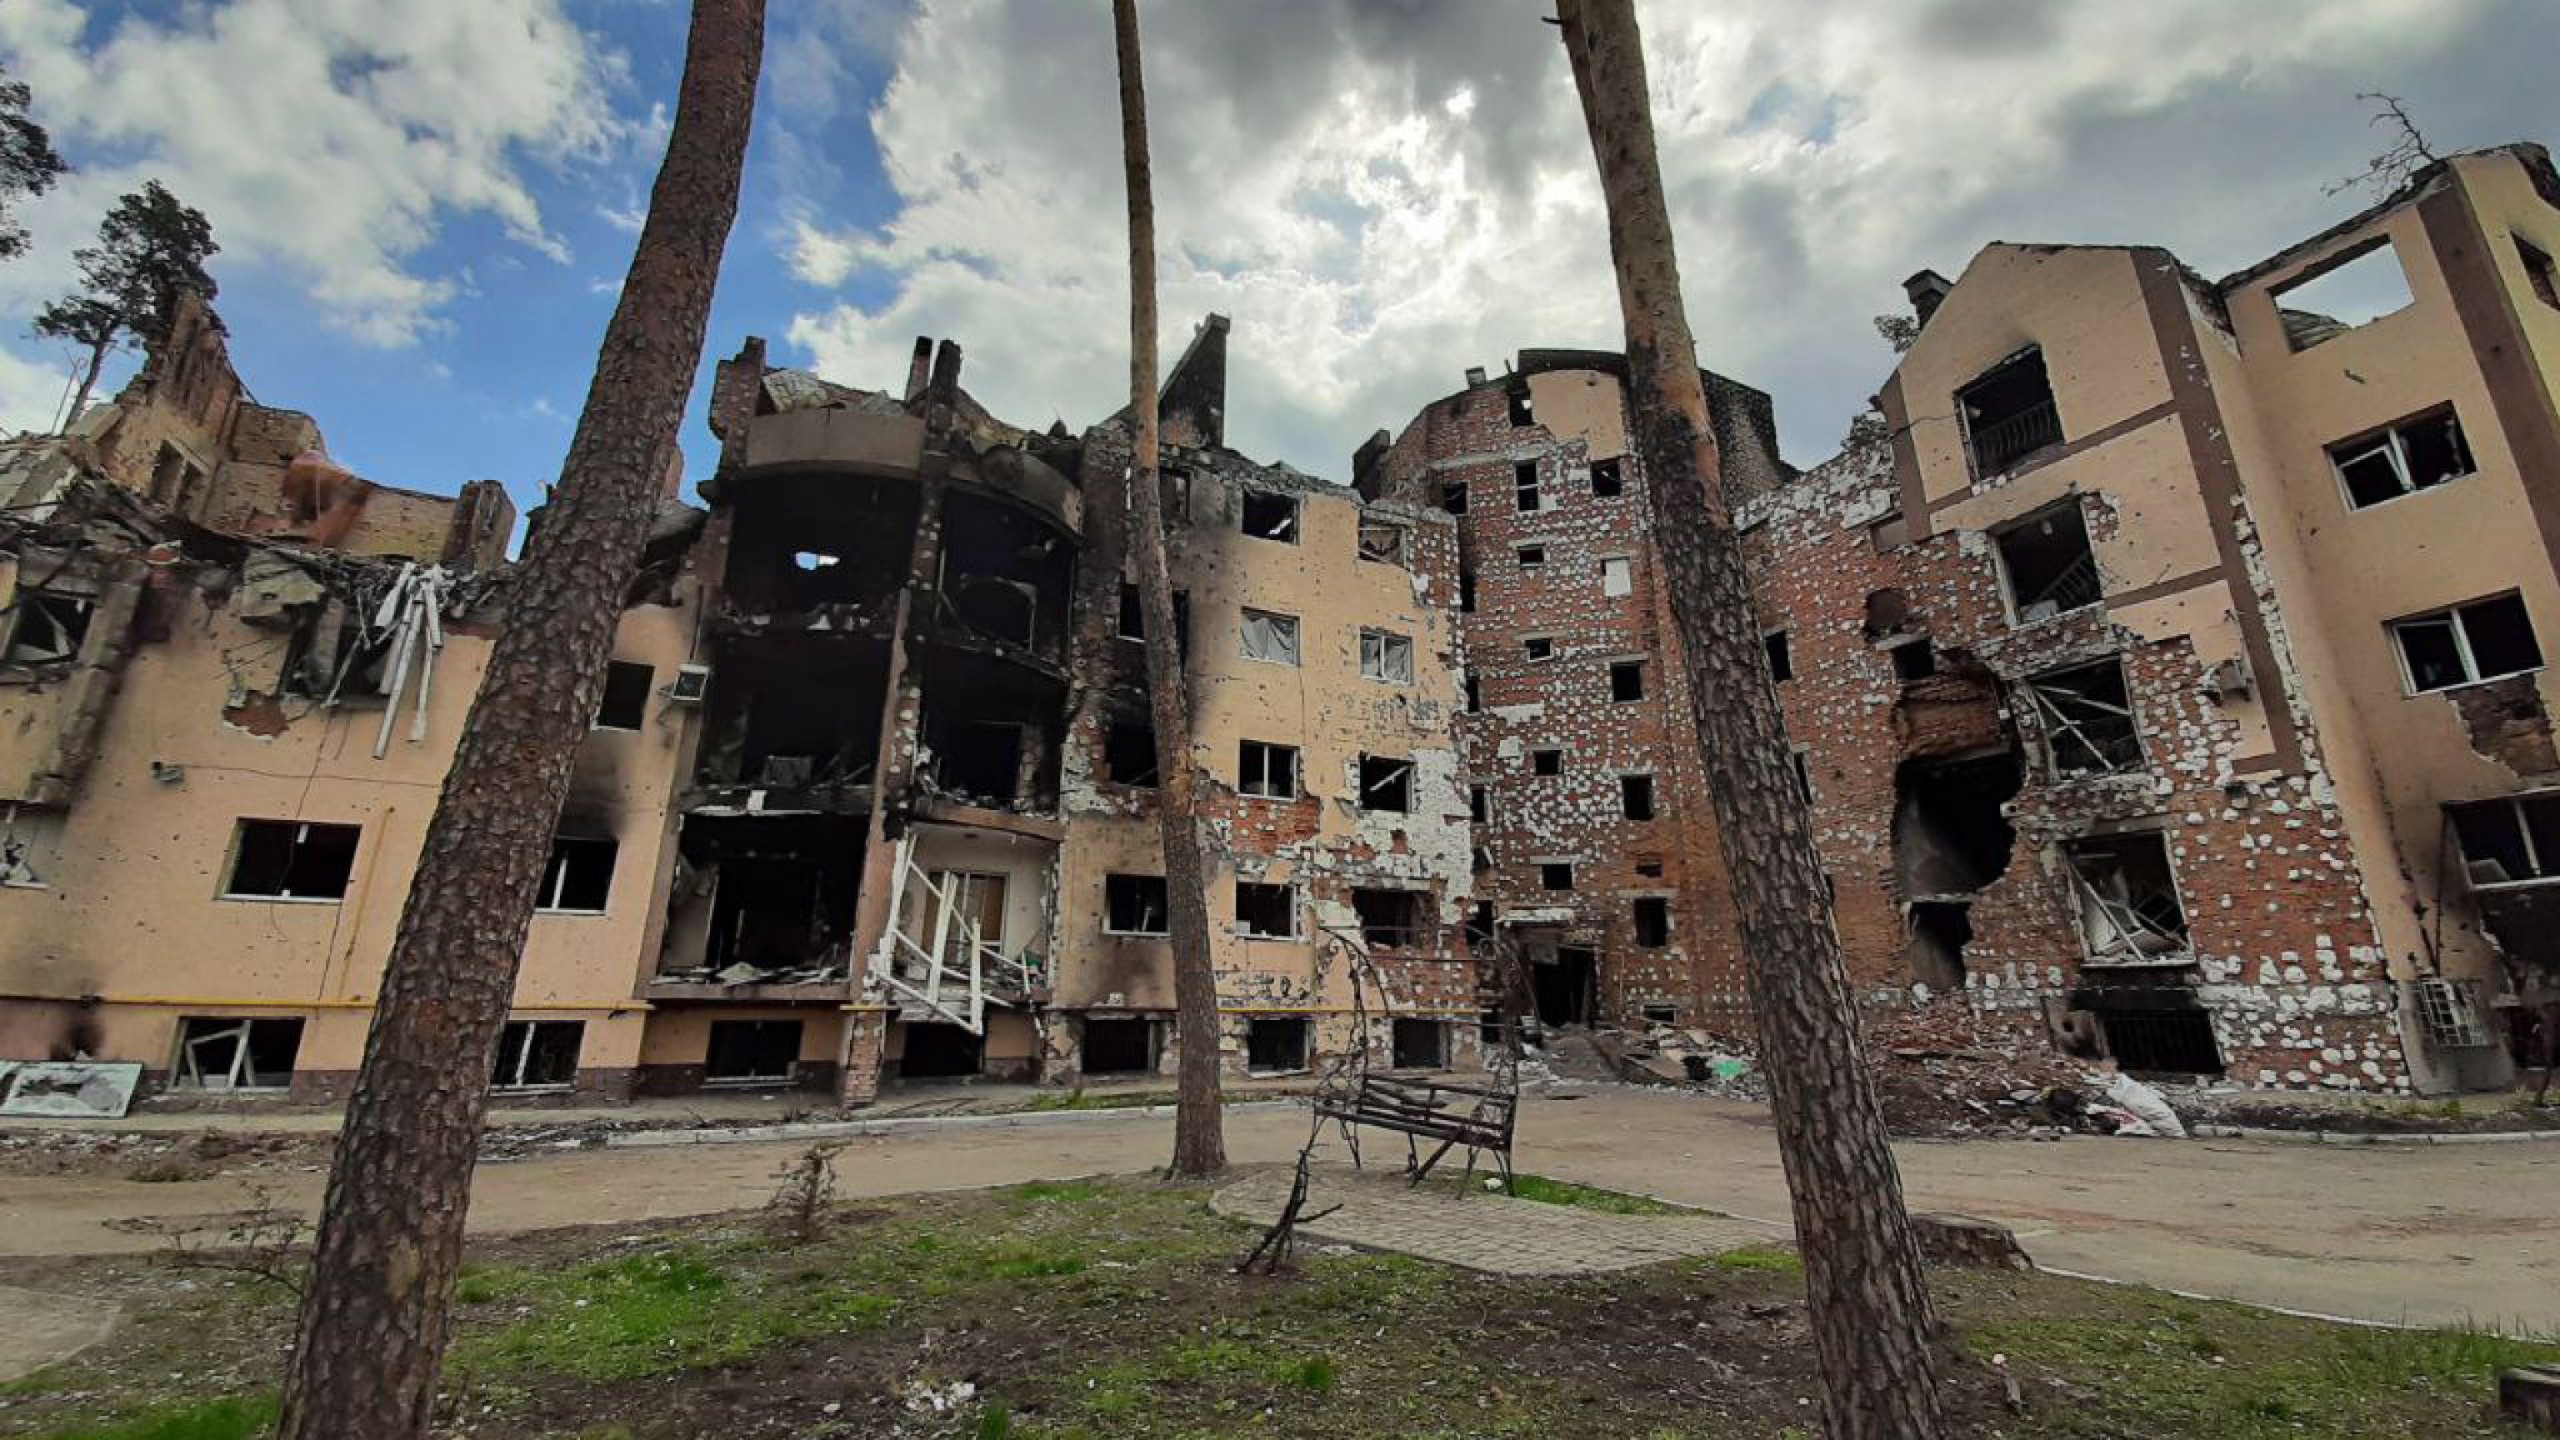 epa09913871 Visible damage to buildings and streets partially destroyed by bombing, seen during a visit by UN Secretary General Antonio Guterres in Irpin,  Ukraine, 28 April 2022. UN Secretary General Antonio Guterres is scheduled to visit the Kiev quarters as well as the theater of operations attributed to the Russian forces, including Bucha, Irpin and Borodyanka. Guterres arrived in Ukraine after a visit to Moscow.  EPA/Laurence Figà-Talamanca